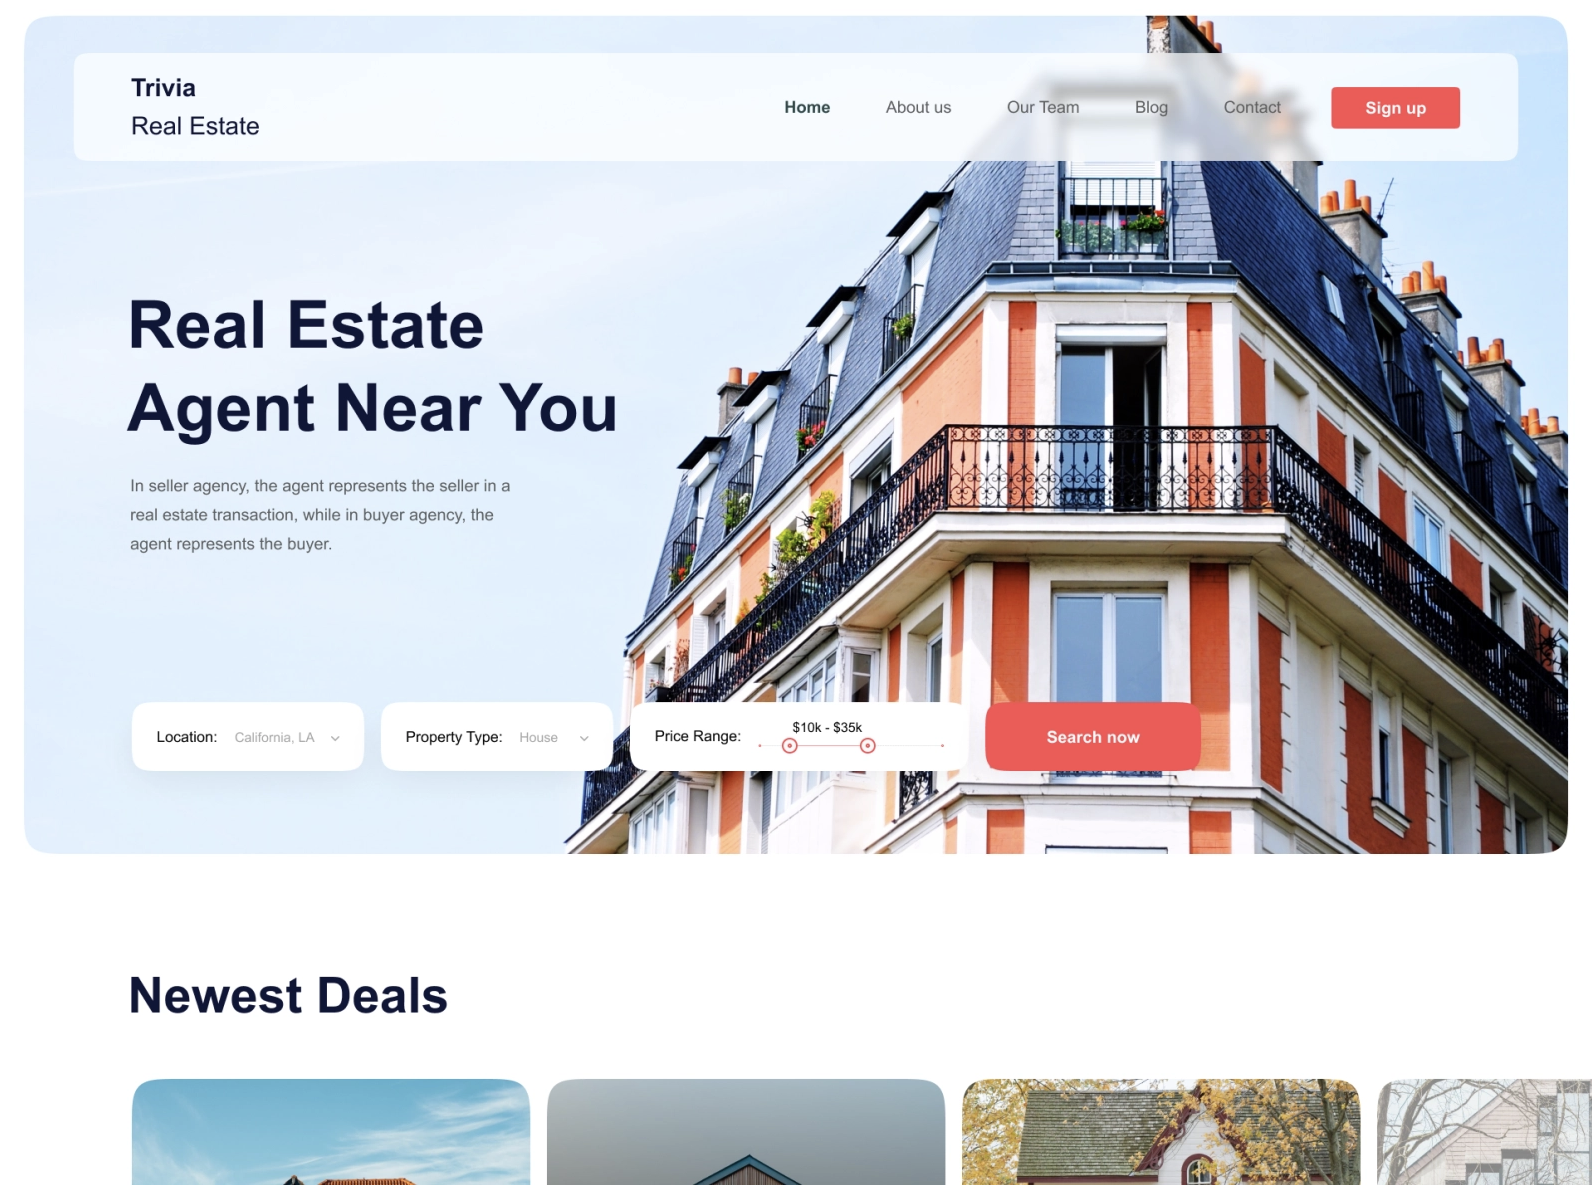 Clean and simple home page — navigation, quick search and featured offers